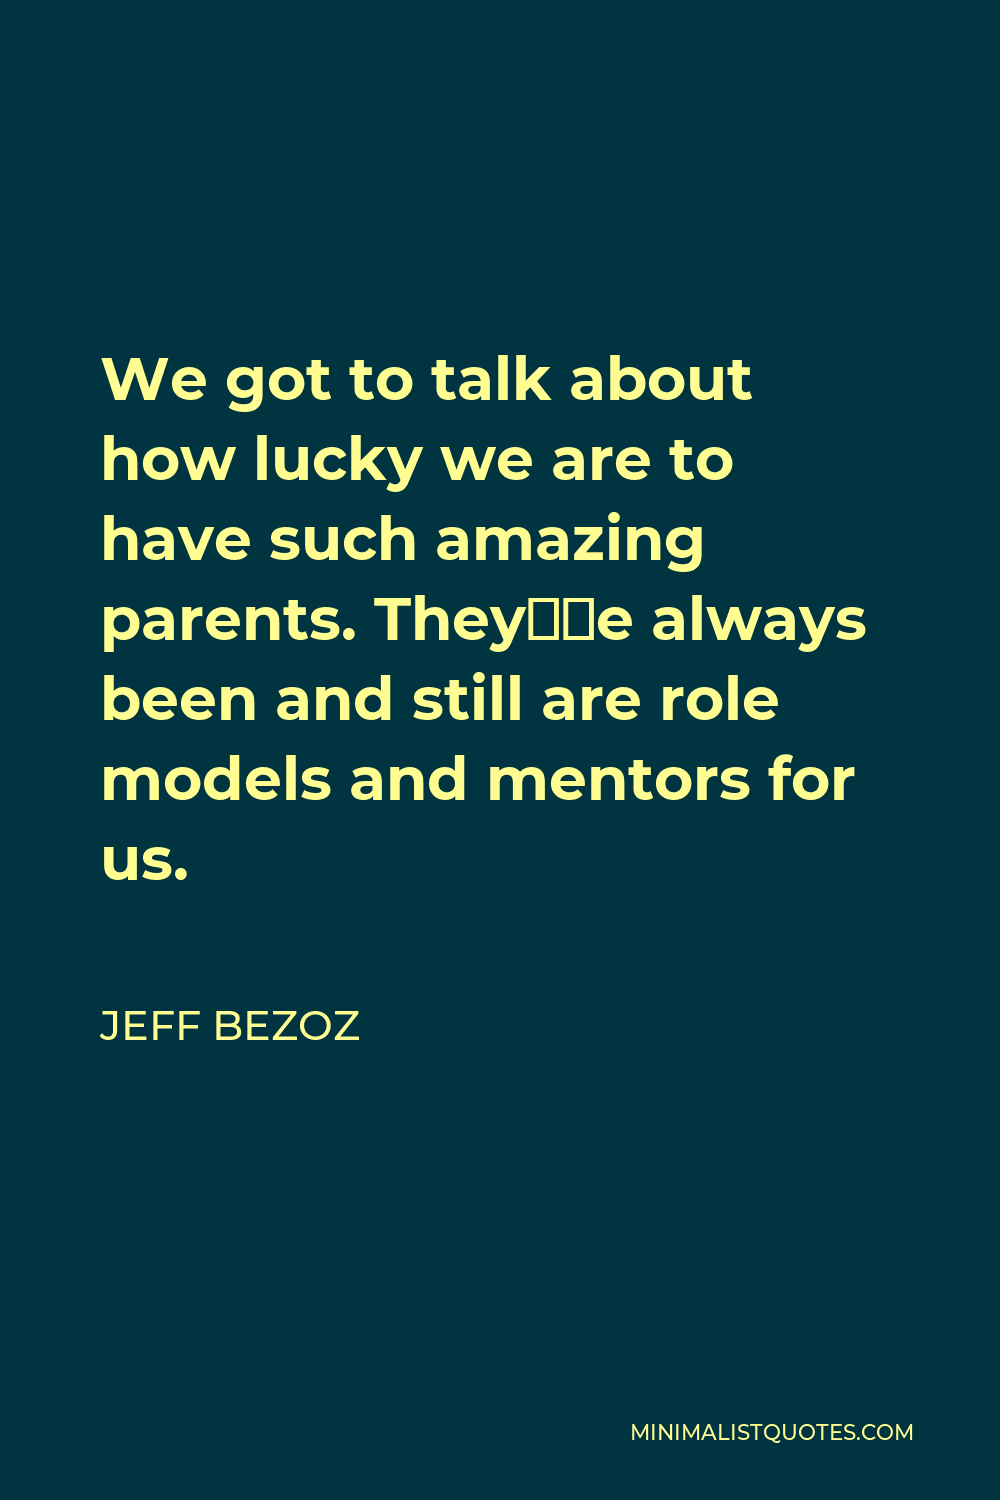 Jeff Bezoz Quote - We got to talk about how lucky we are to have such amazing parents. They’ve always been and still are role models and mentors for us.